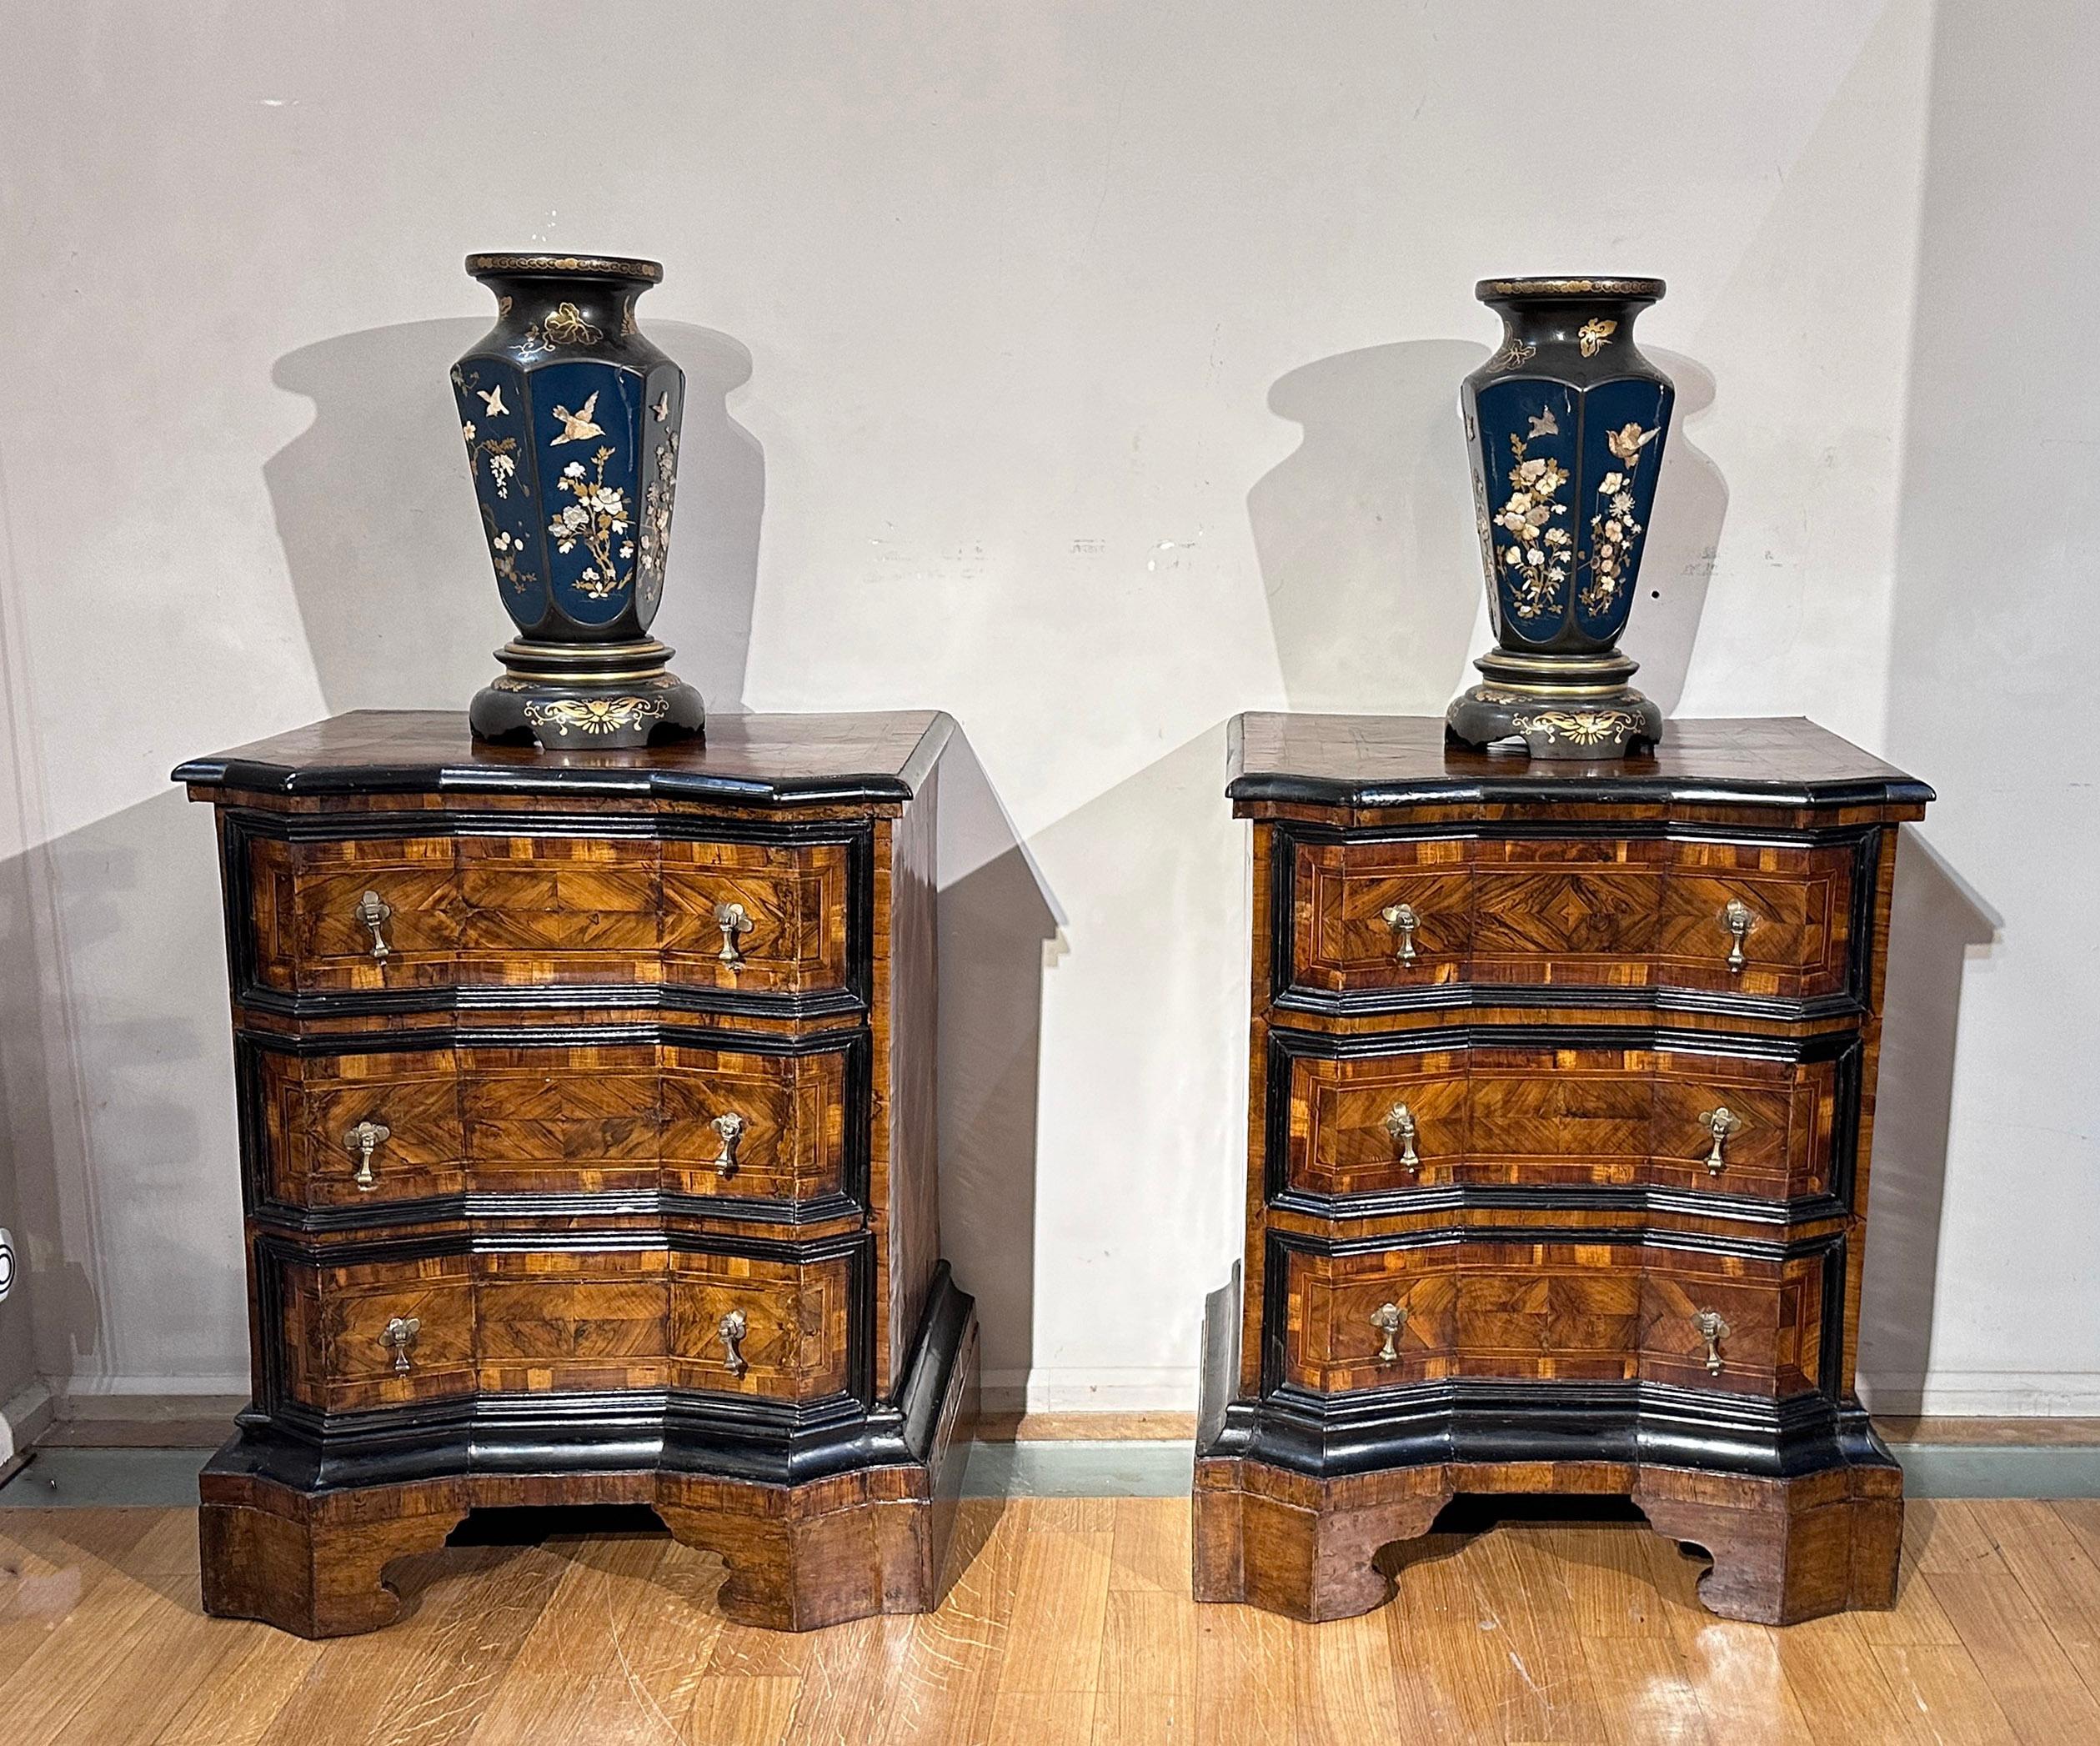 END OF THE 19th CENTURY PAIR OF JAPANESE VASES For Sale 2